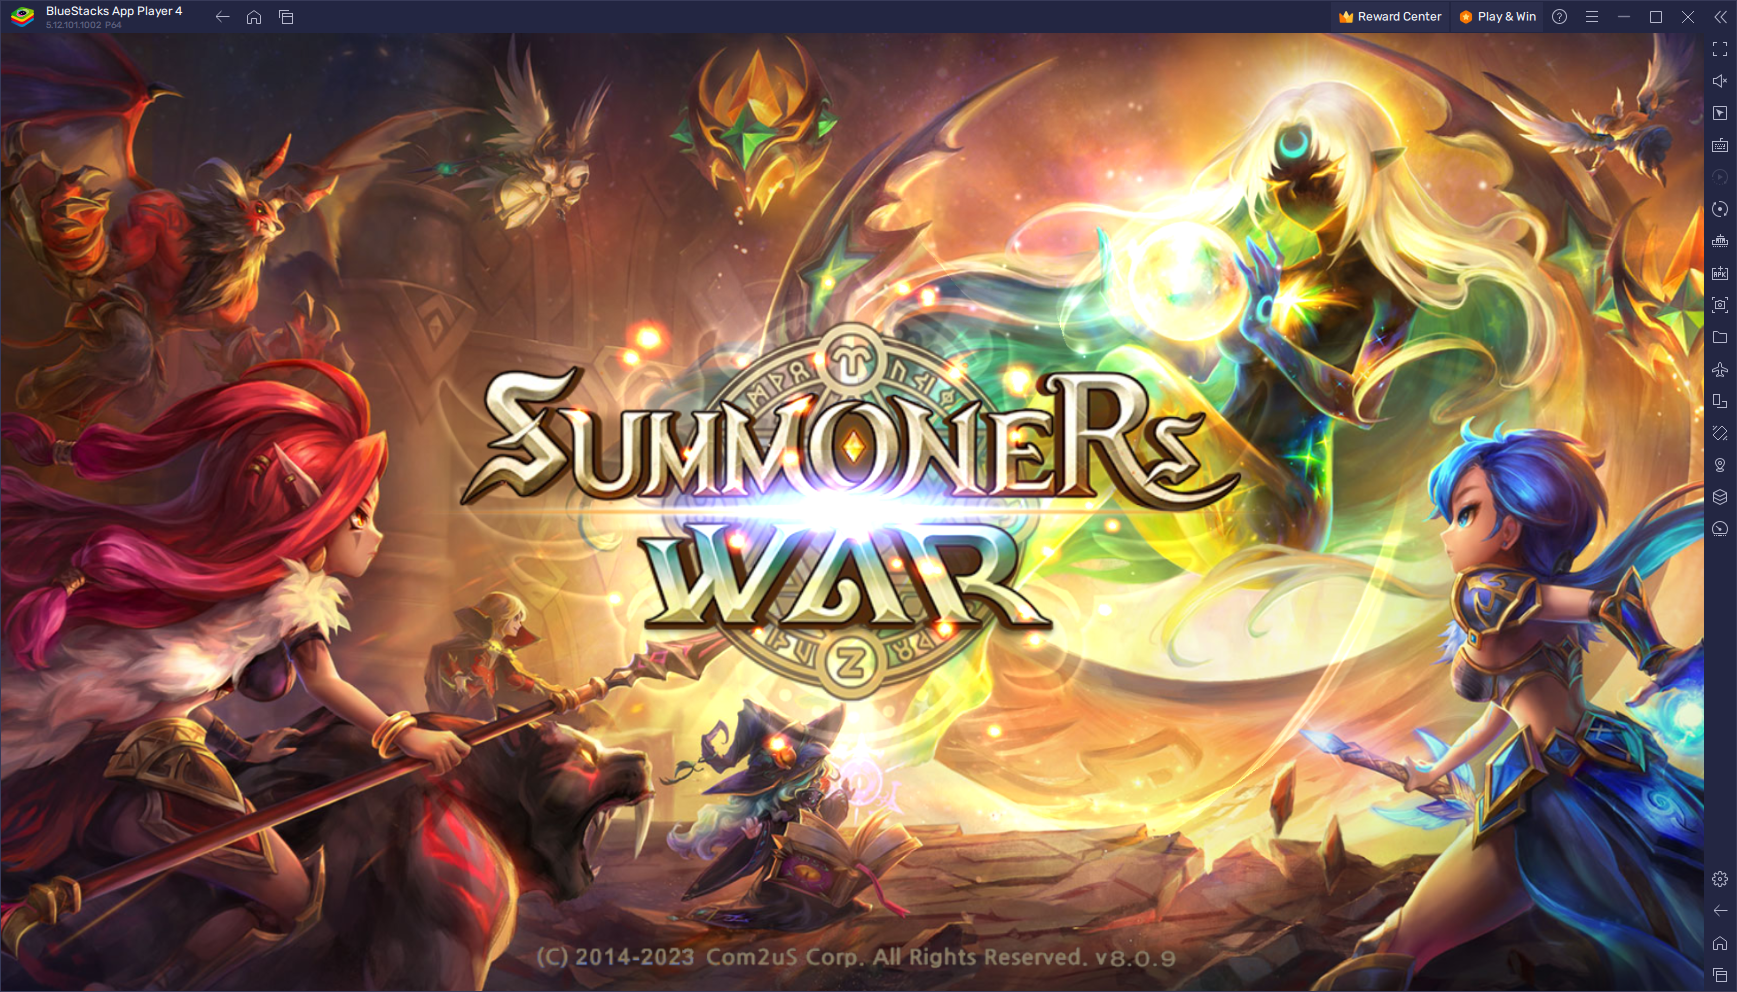 Summoners War Update v8.0.9 – Everything That’s New in the Latest Patch